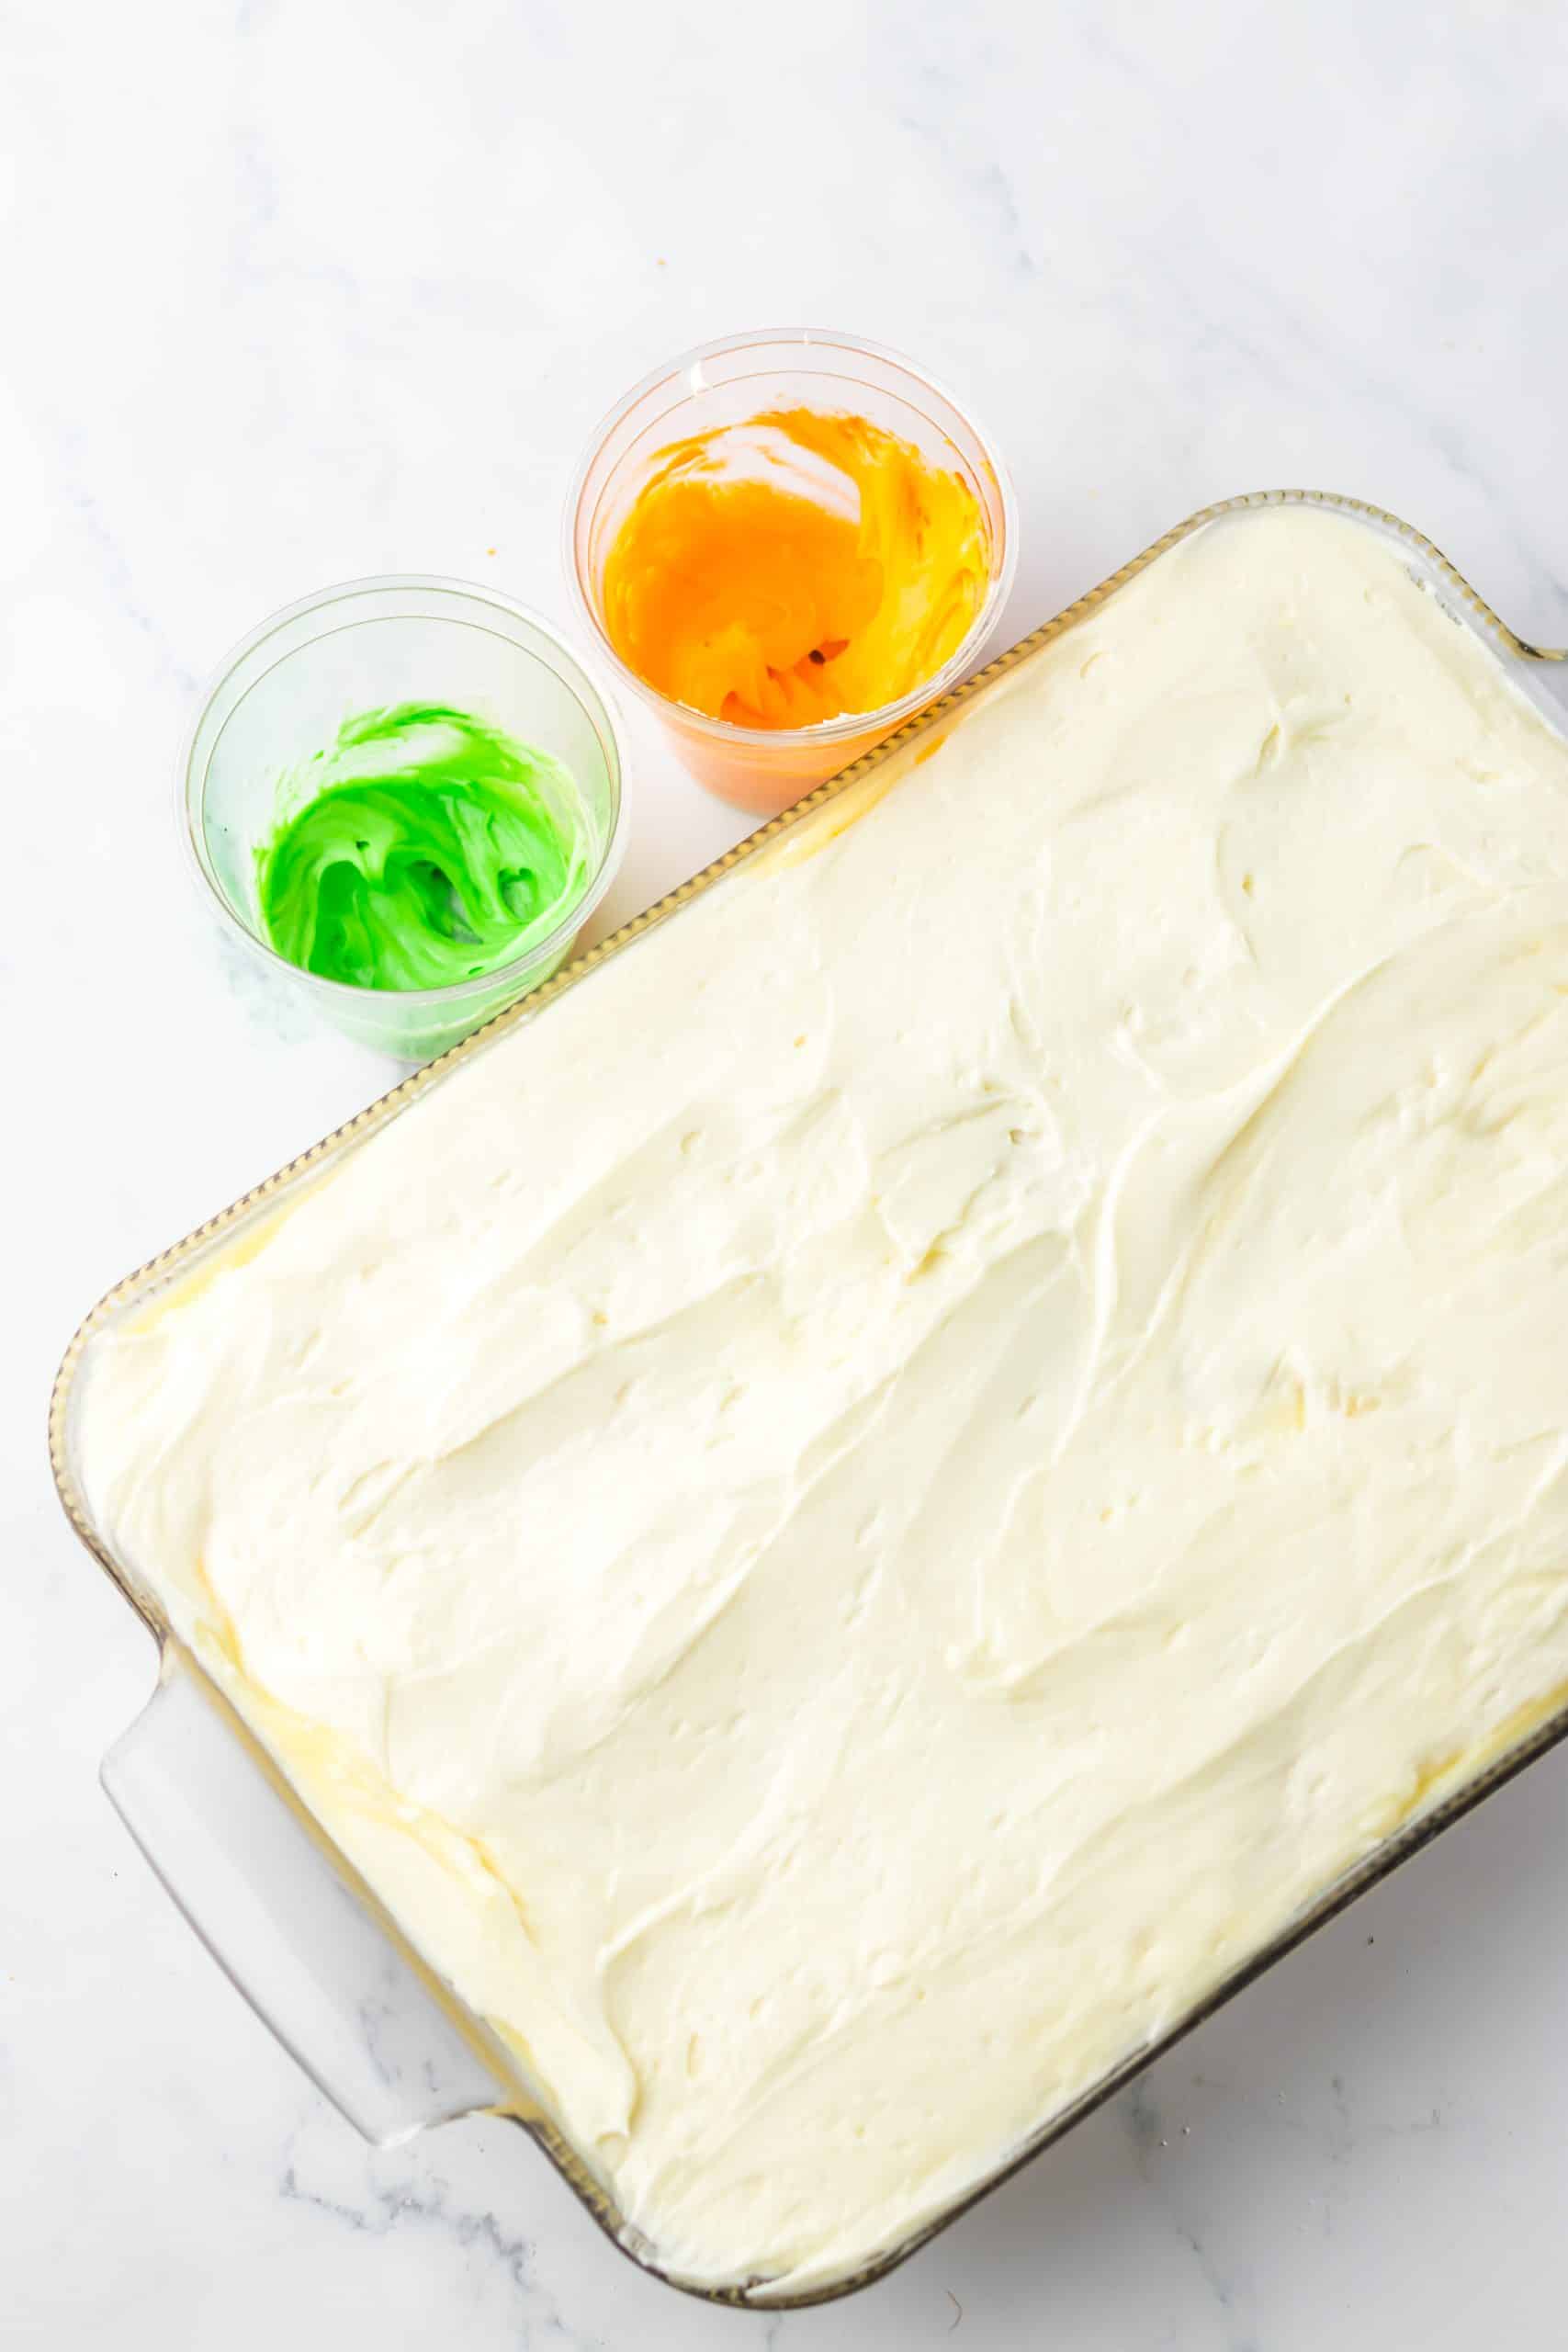 a vanilla frosted carrot cake with cups of orange and green dyed frosting on the side